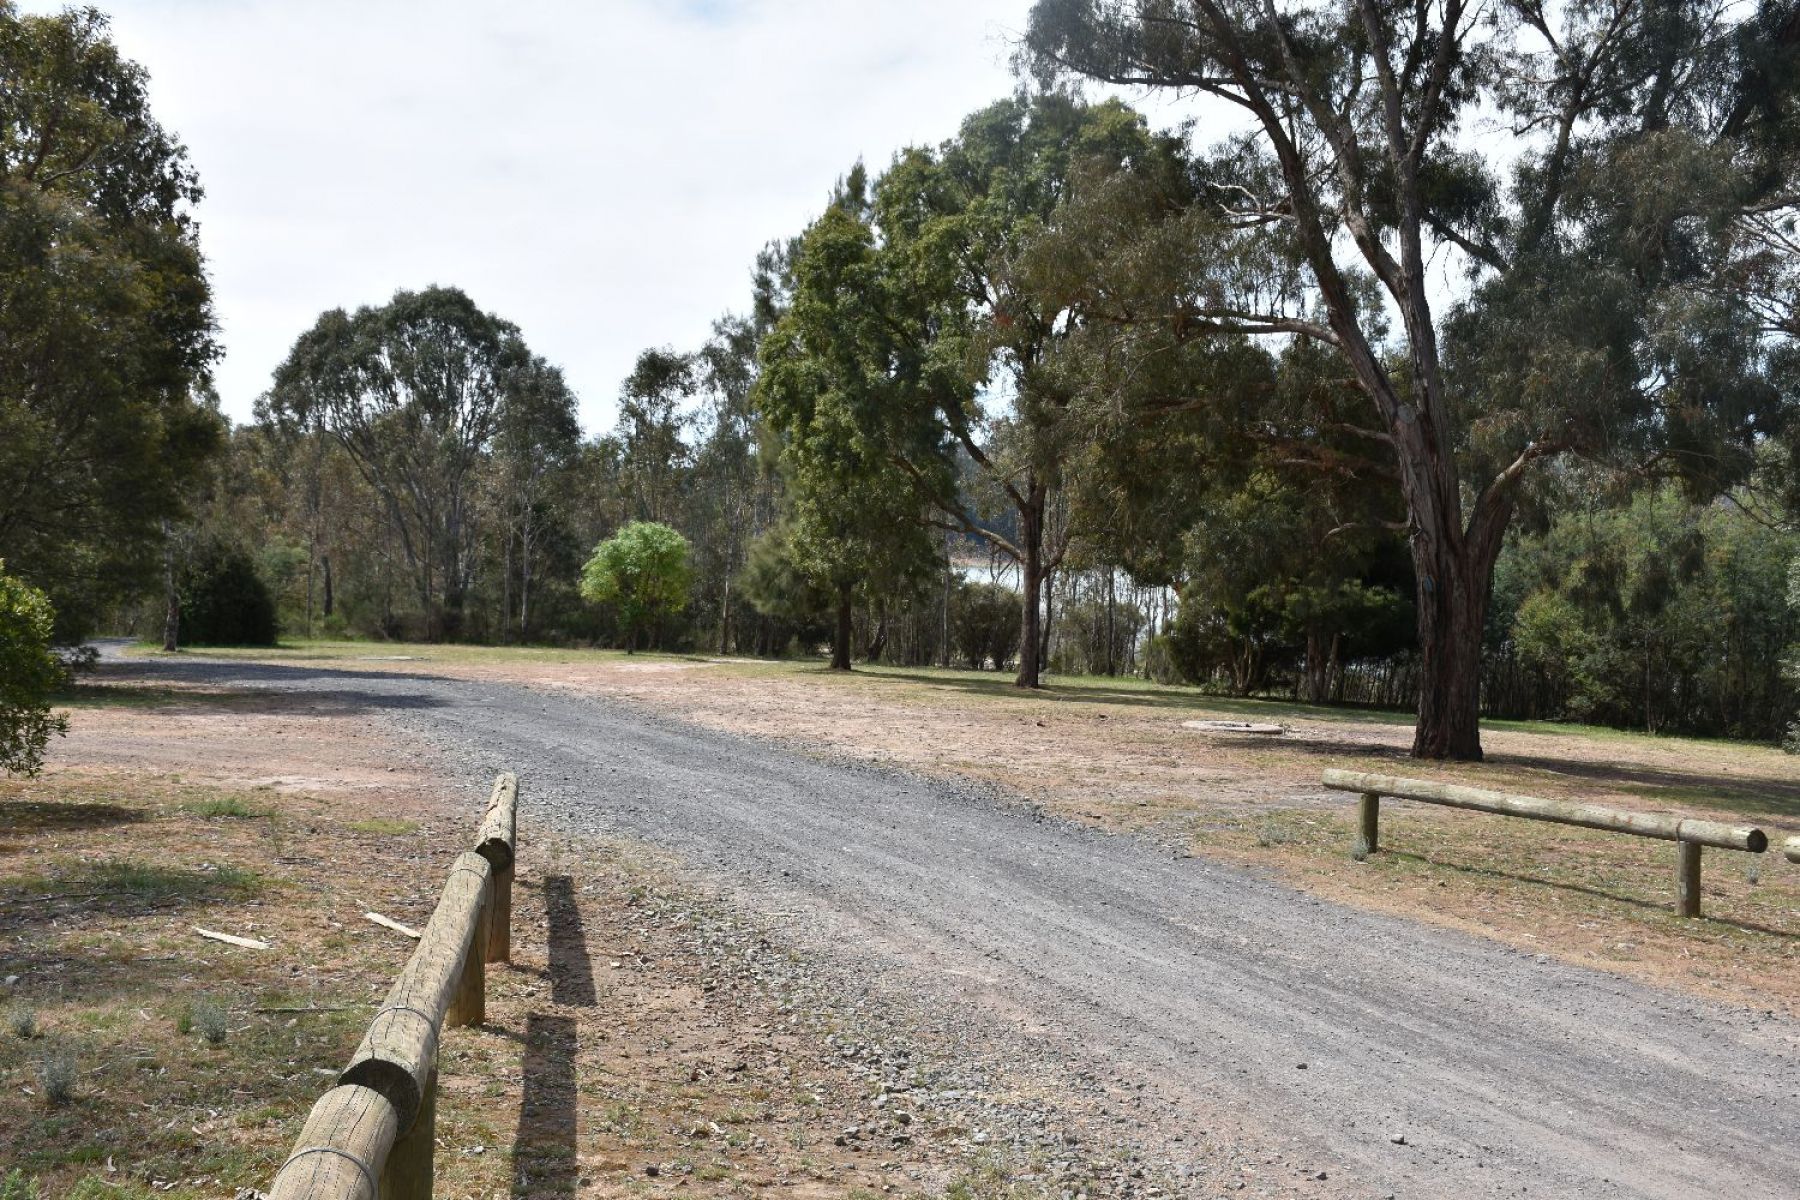 Gravel road entrance to the site, with big open camping spaces and the shoreline in site